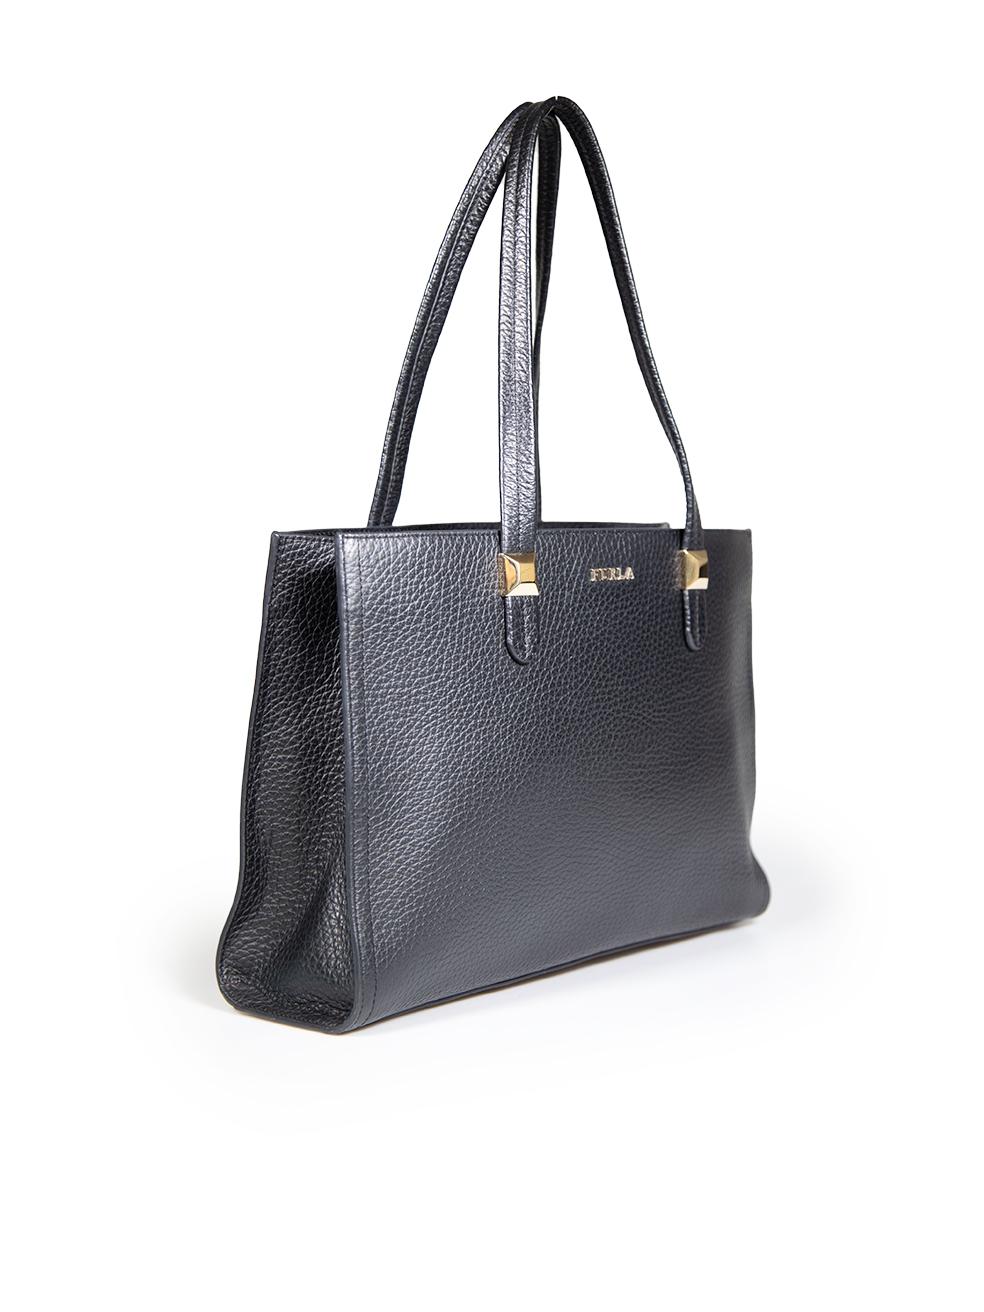 CONDITION is Very good. Minimal wear to bag is evident. Minimal scratches to front bottom right piping. Minimal tarnishing to interior zipper pull on this used Furla designer resale item.
 
 
 
 Details
 
 
 Black
 
 Leather
 
 Medium tote bag
 
